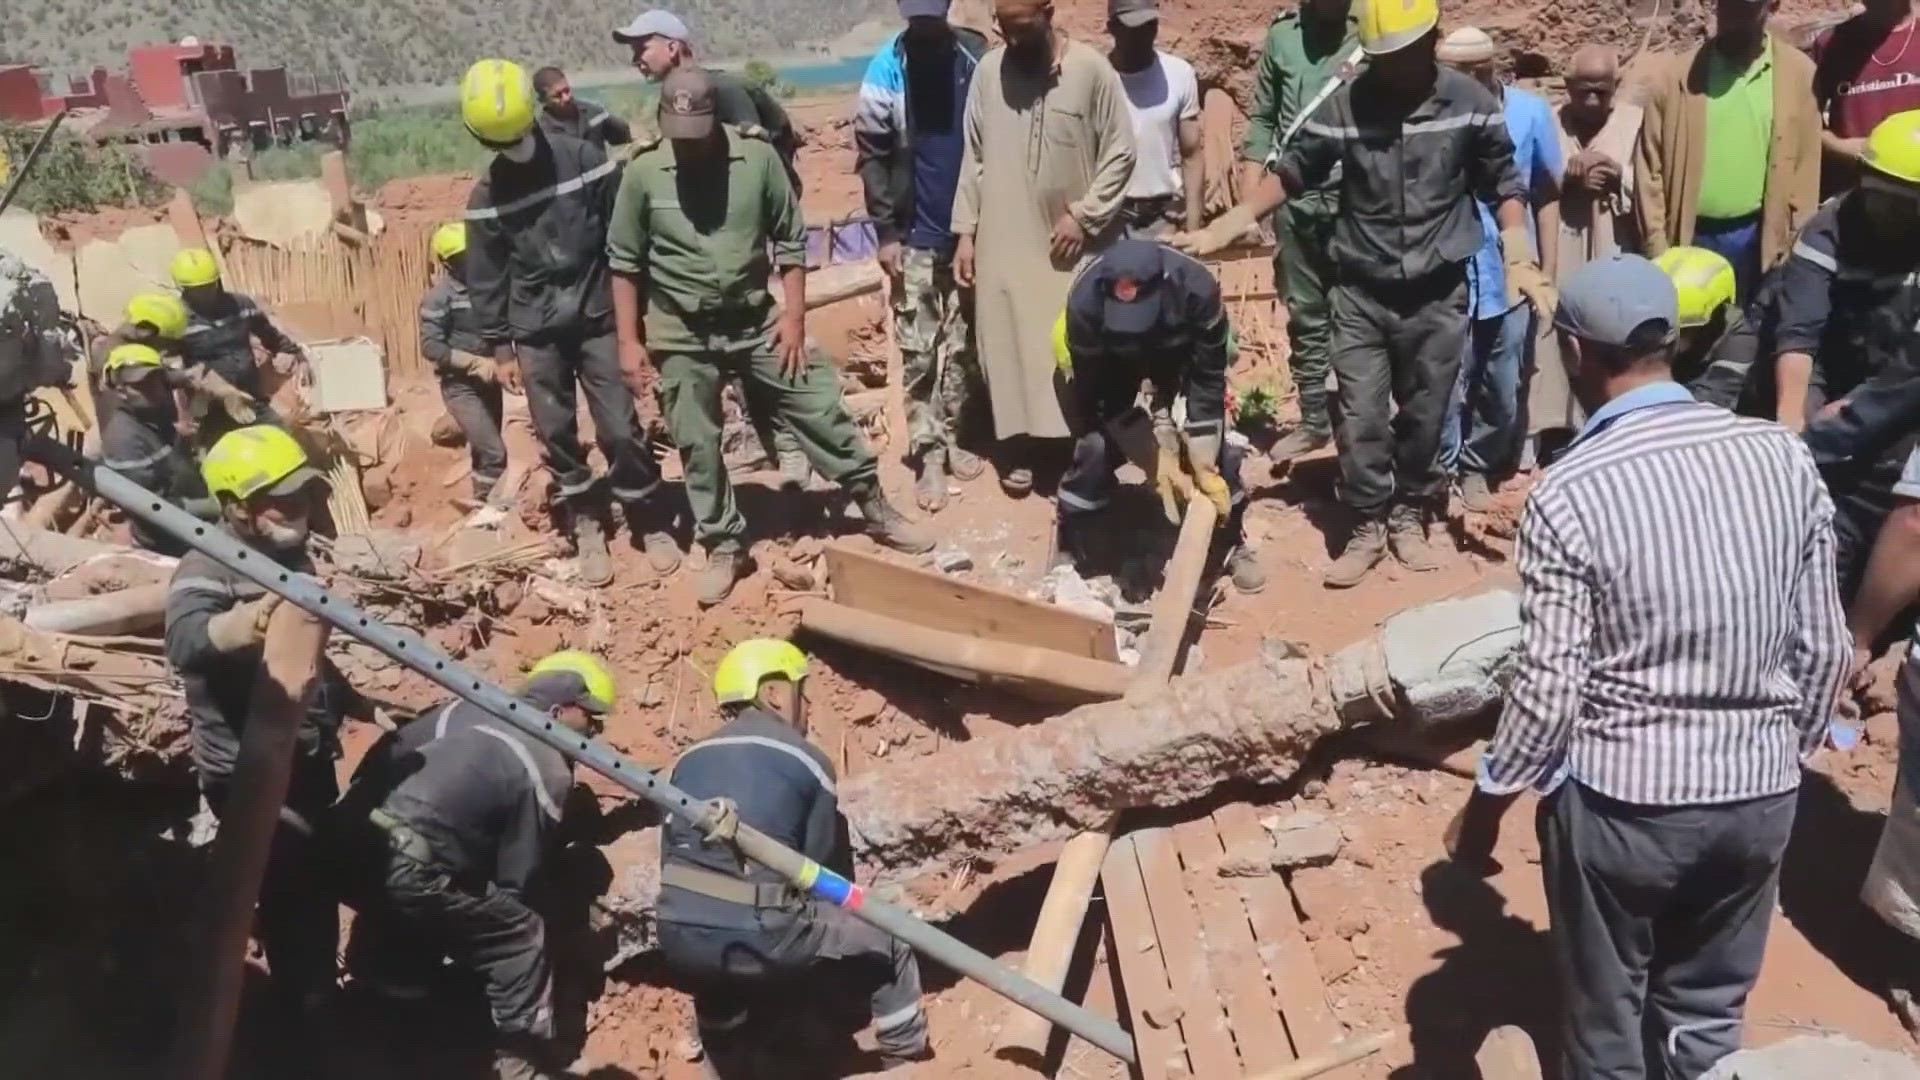 Rescuers raced against time today to find survivors in the rubble more than 48 hours after Morocco's deadliest earthquake in over six decades.